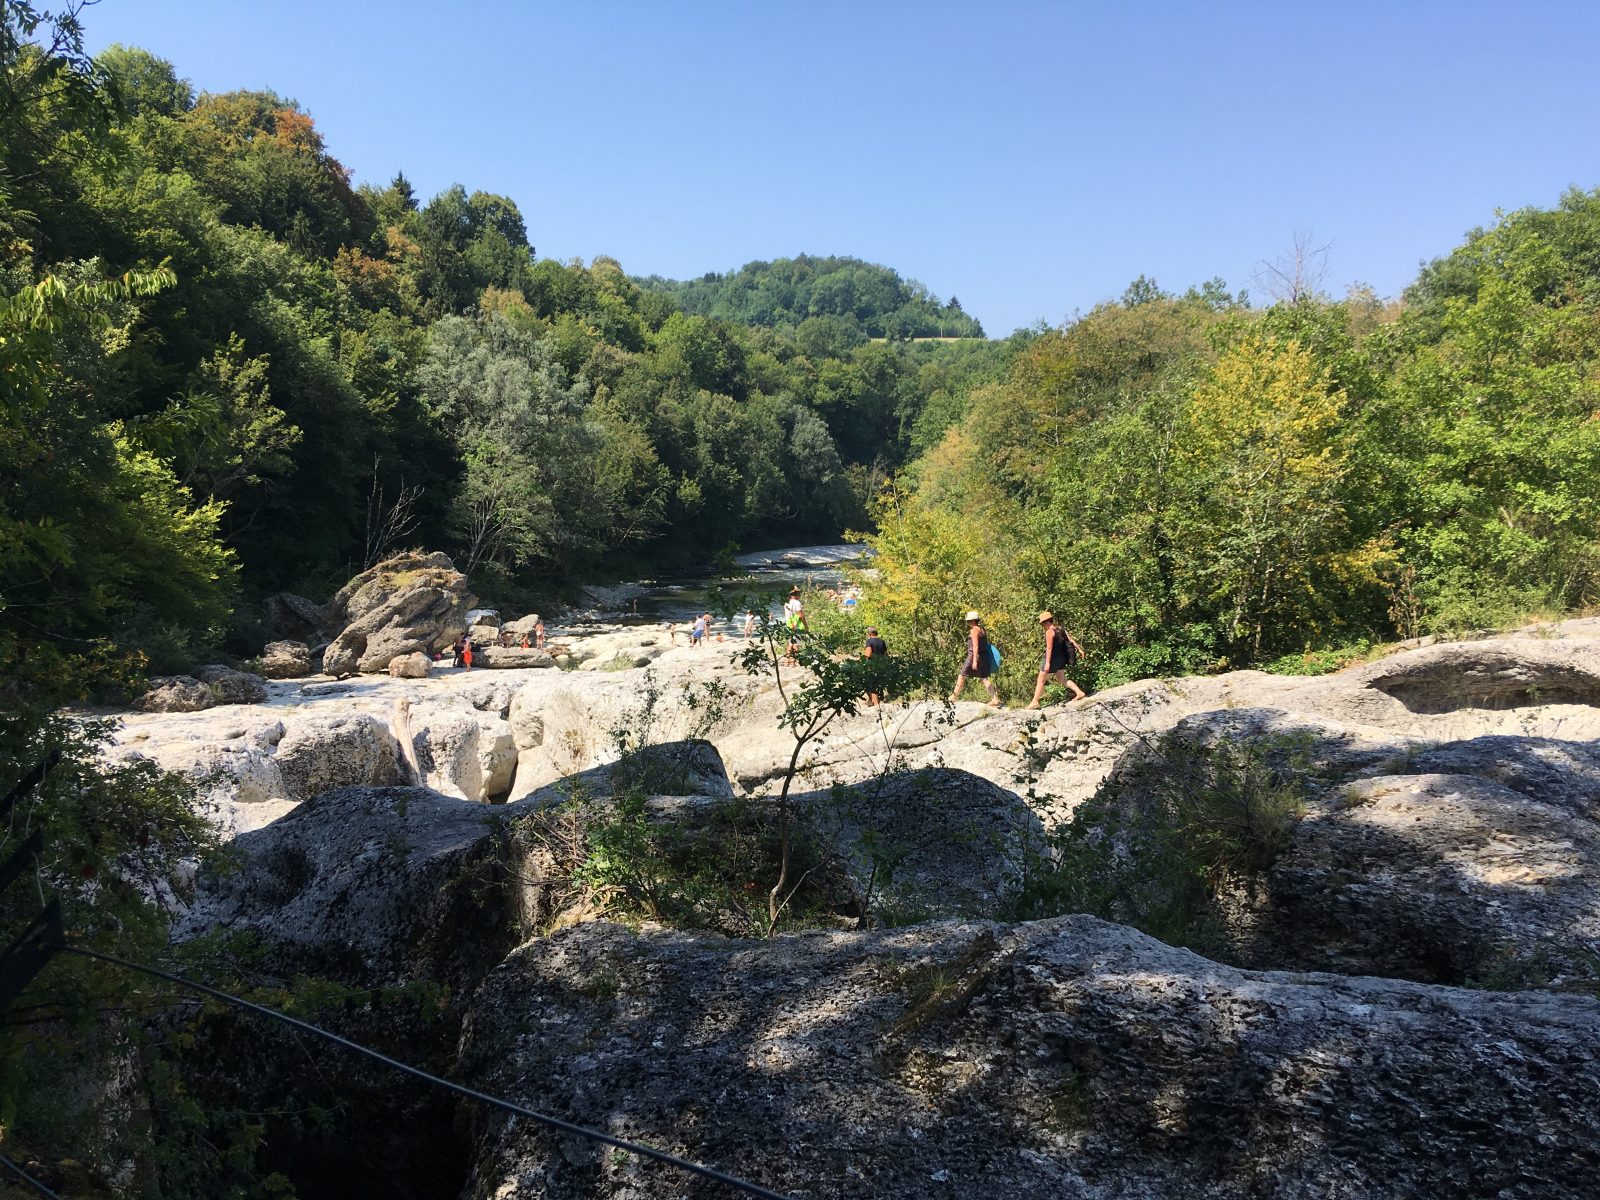 The Gorges du Fier - Lovagny